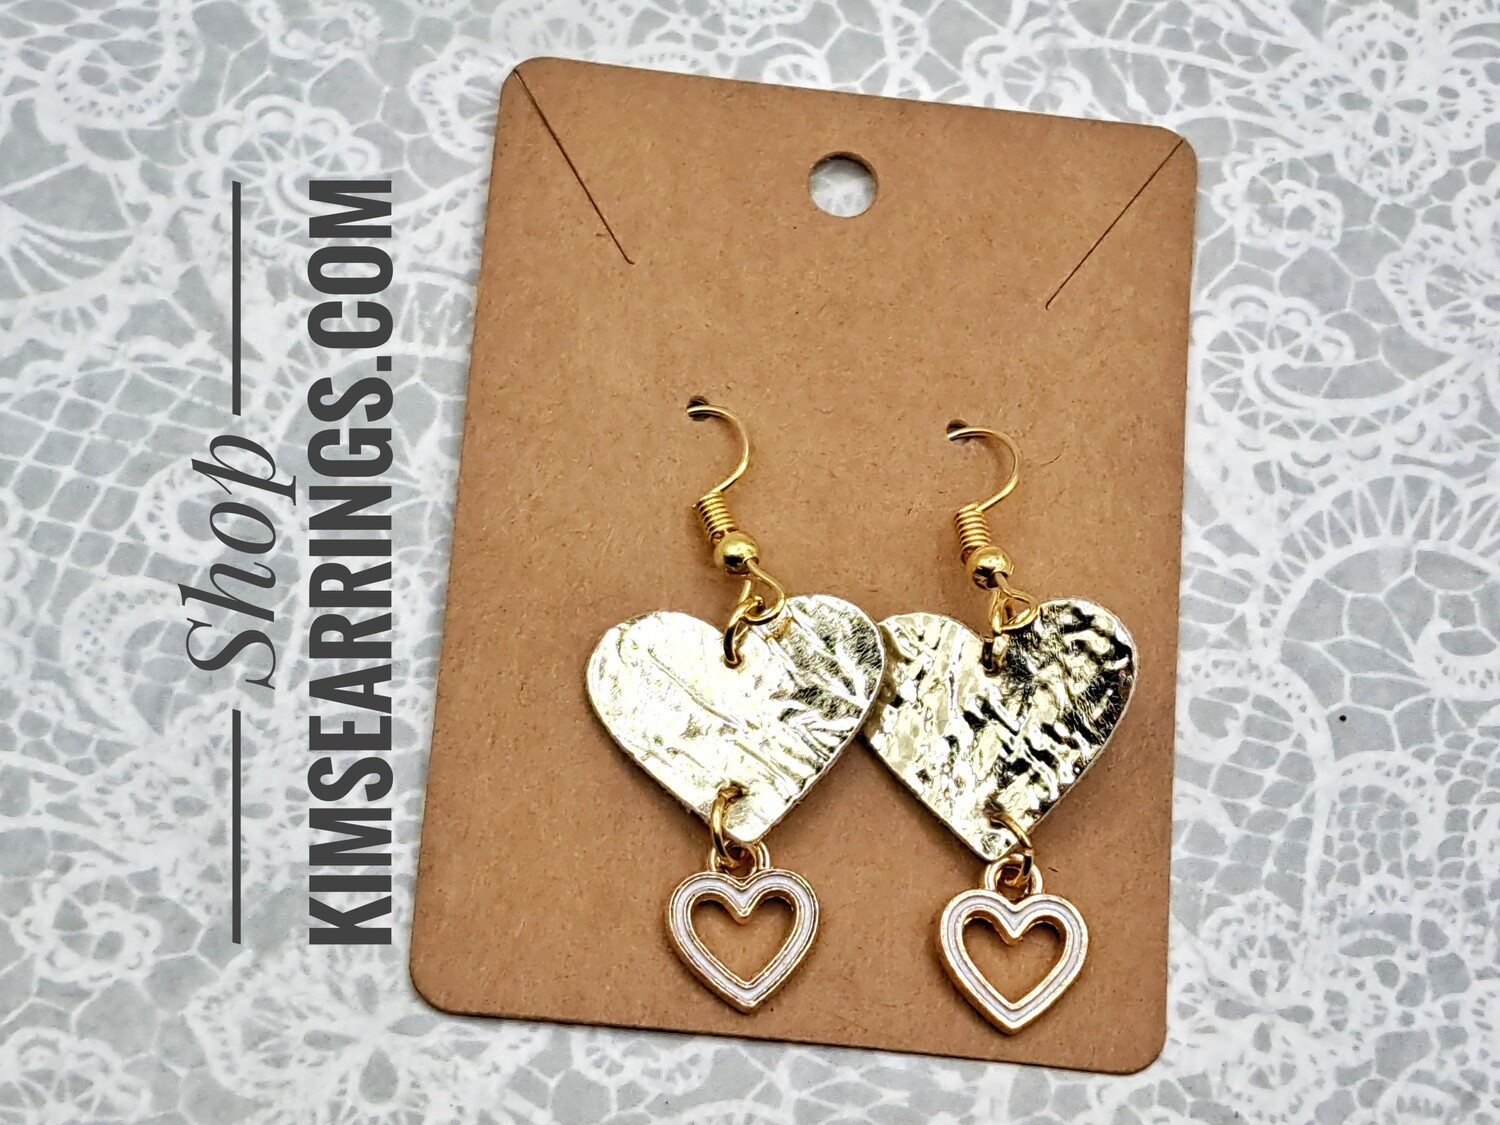 Handmade Gold Foil Faux Leather with White Cut-out Heart Charms Earrings